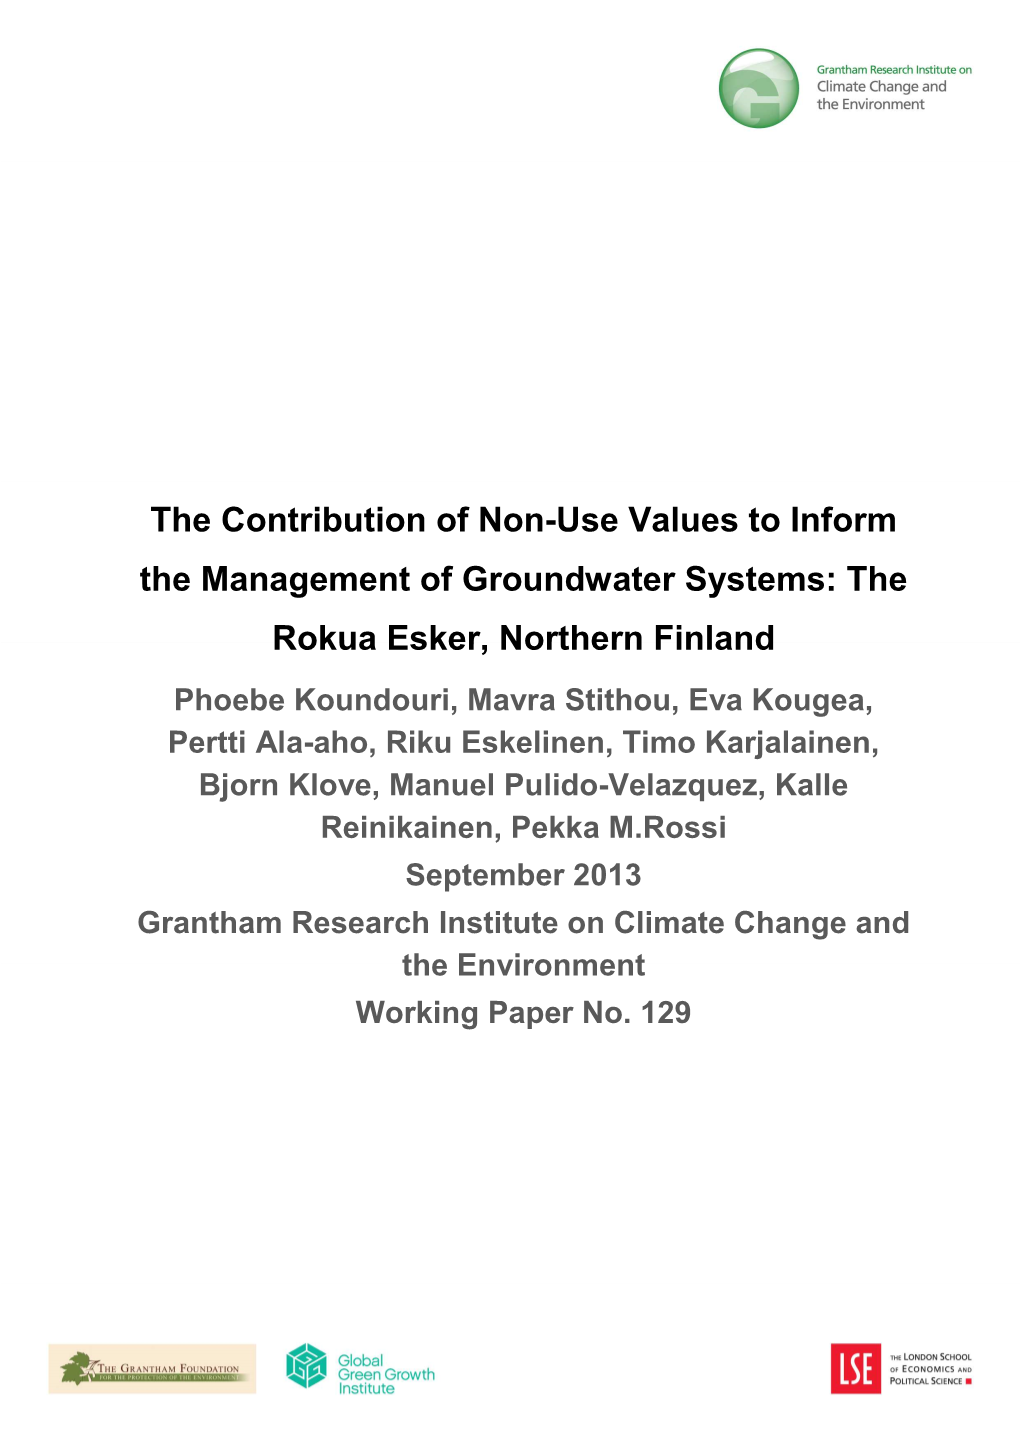 The Contribution of Non-Use Values to Inform the Management Of